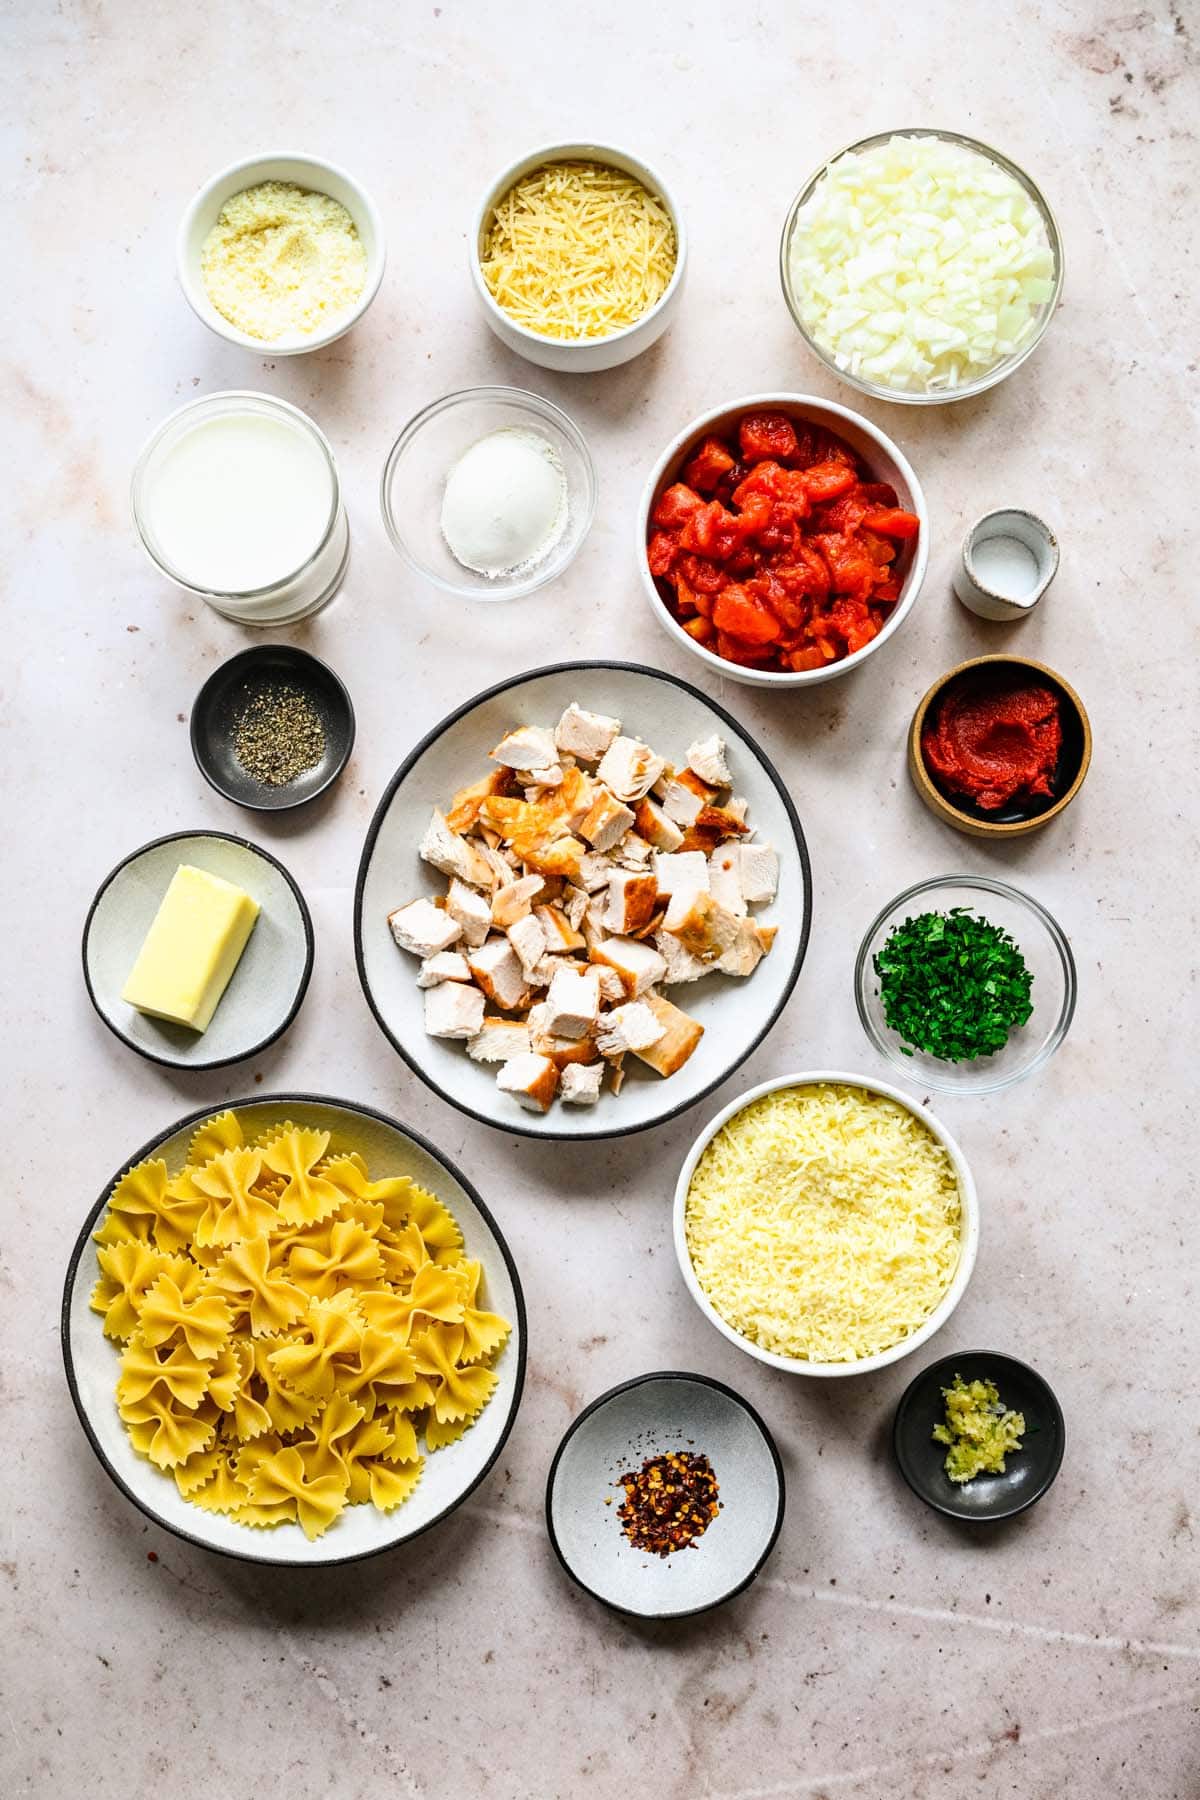 Ingredients needed to make a baked chicken and pasta casserole, arranged in assorted prep bowls, viewed from overhead.